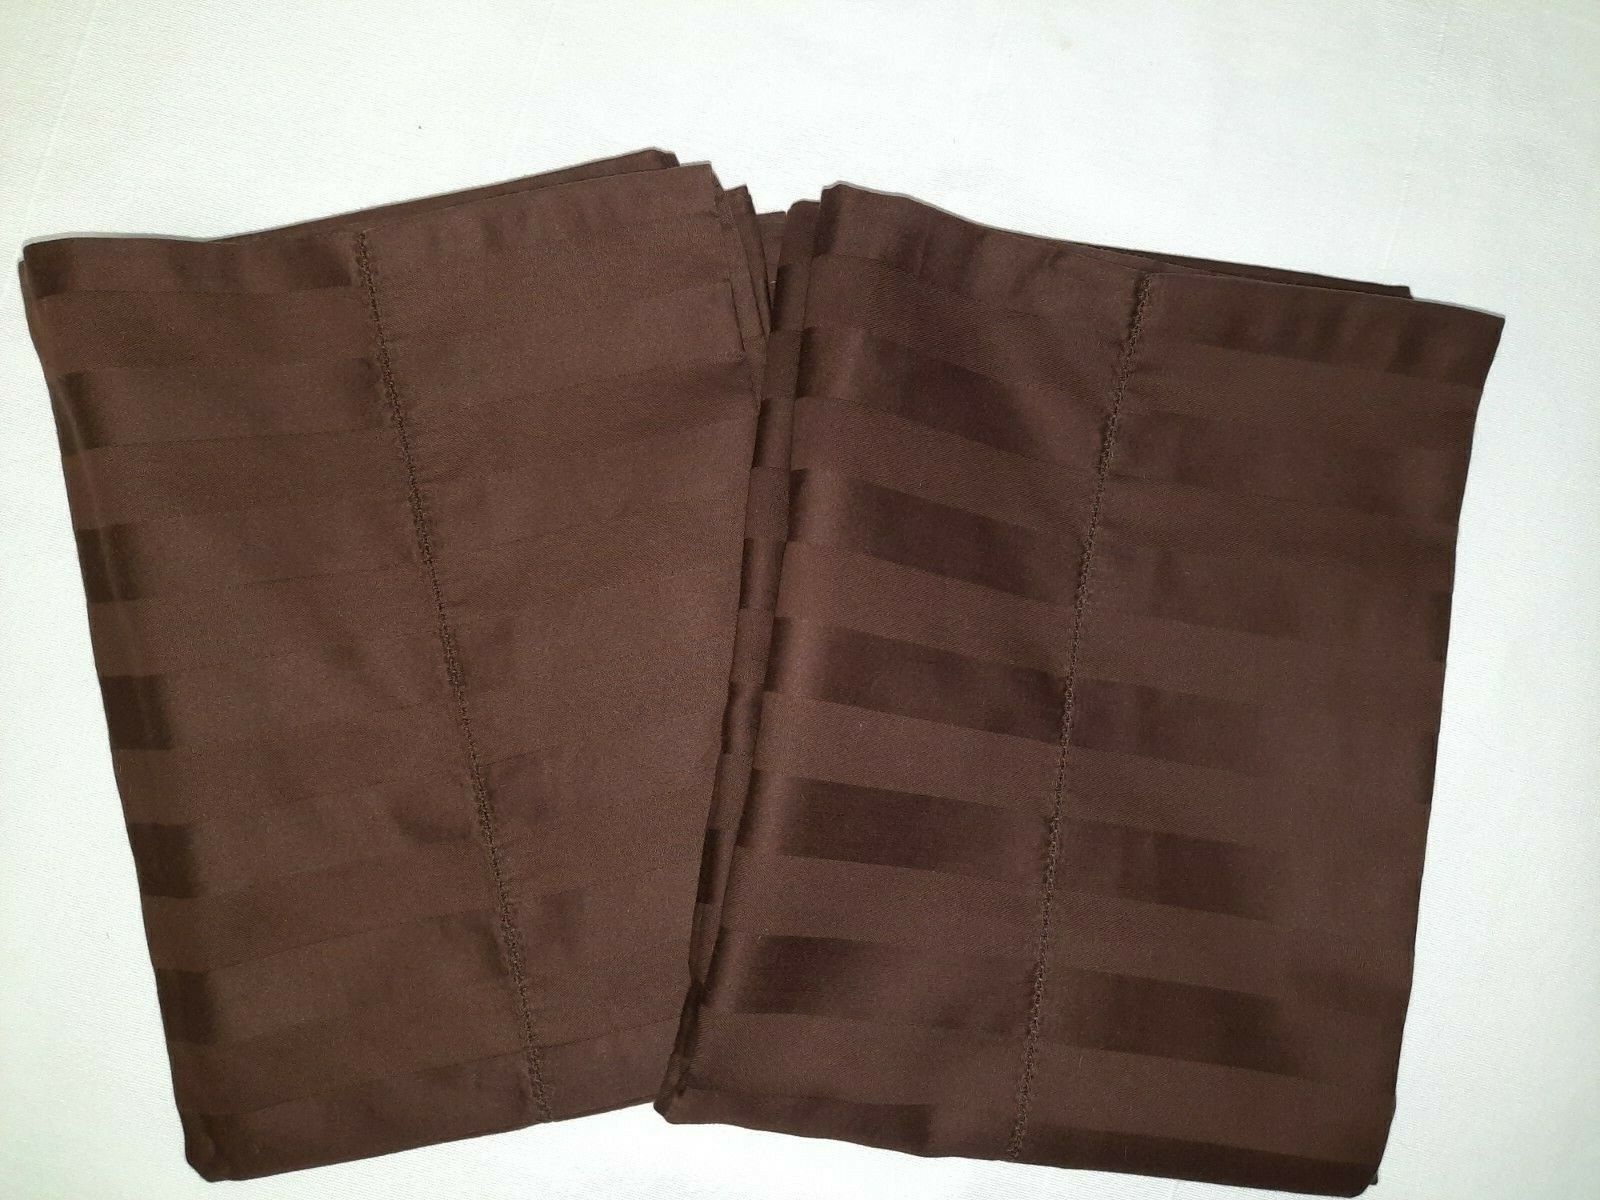 Primary image for Pair of Charter Club Damask Standard Queen Size Dark Brown Stripes Pillowcases